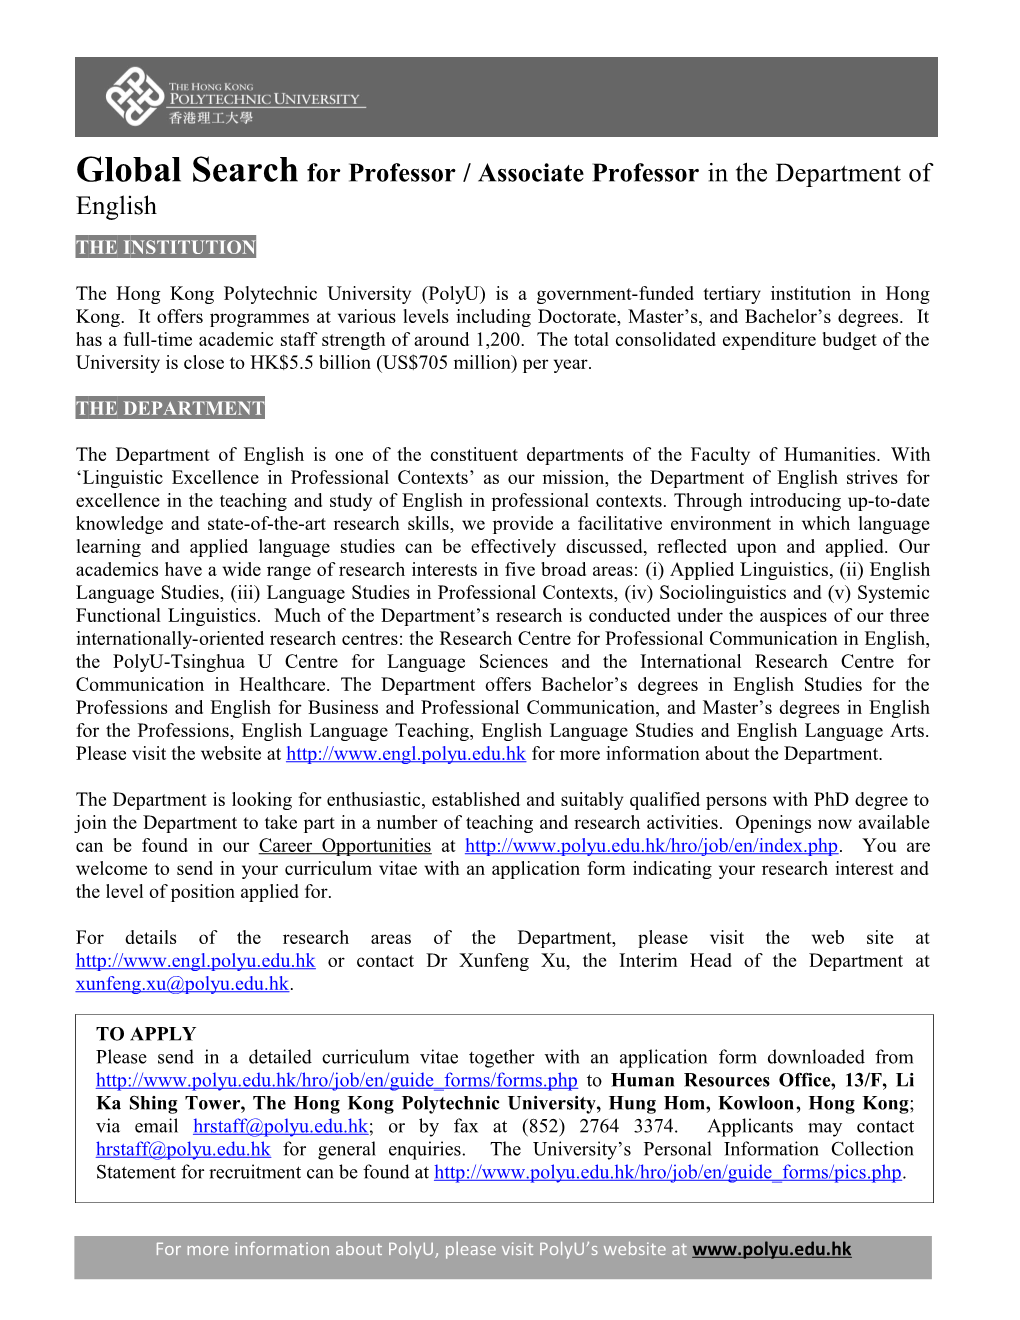 Global Search for Professor / Associate Professor in the Department of English